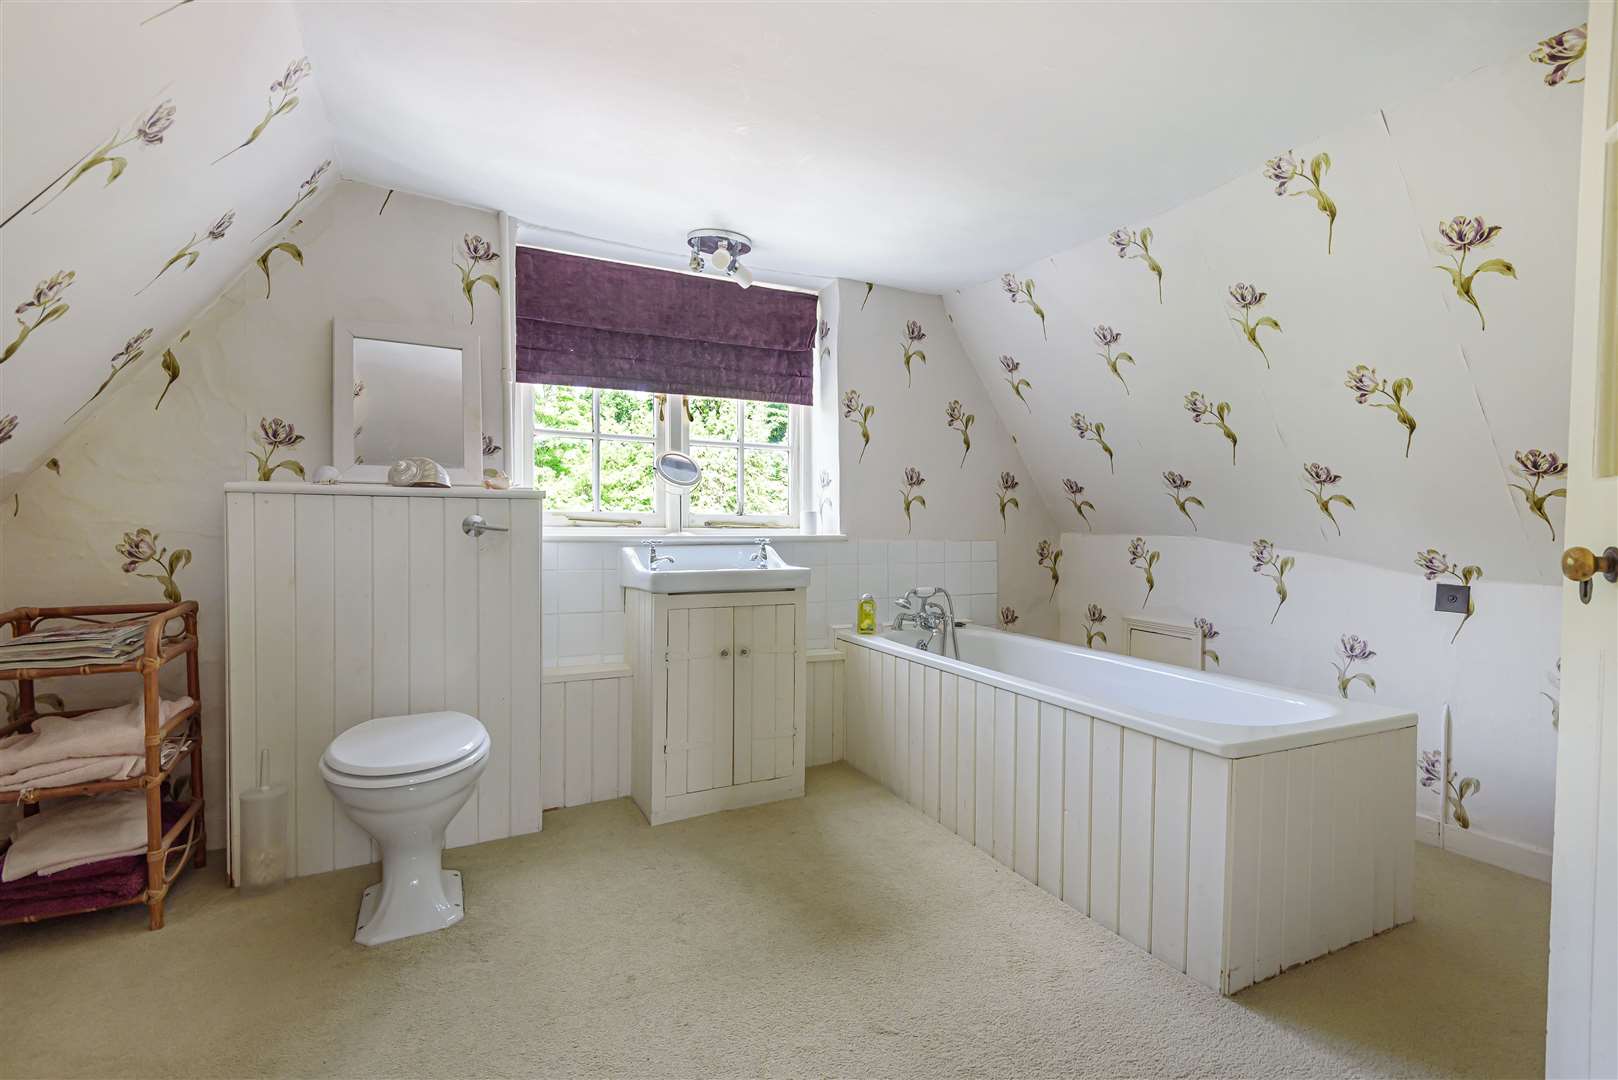 One of the bathrooms. Pic: Niche photography